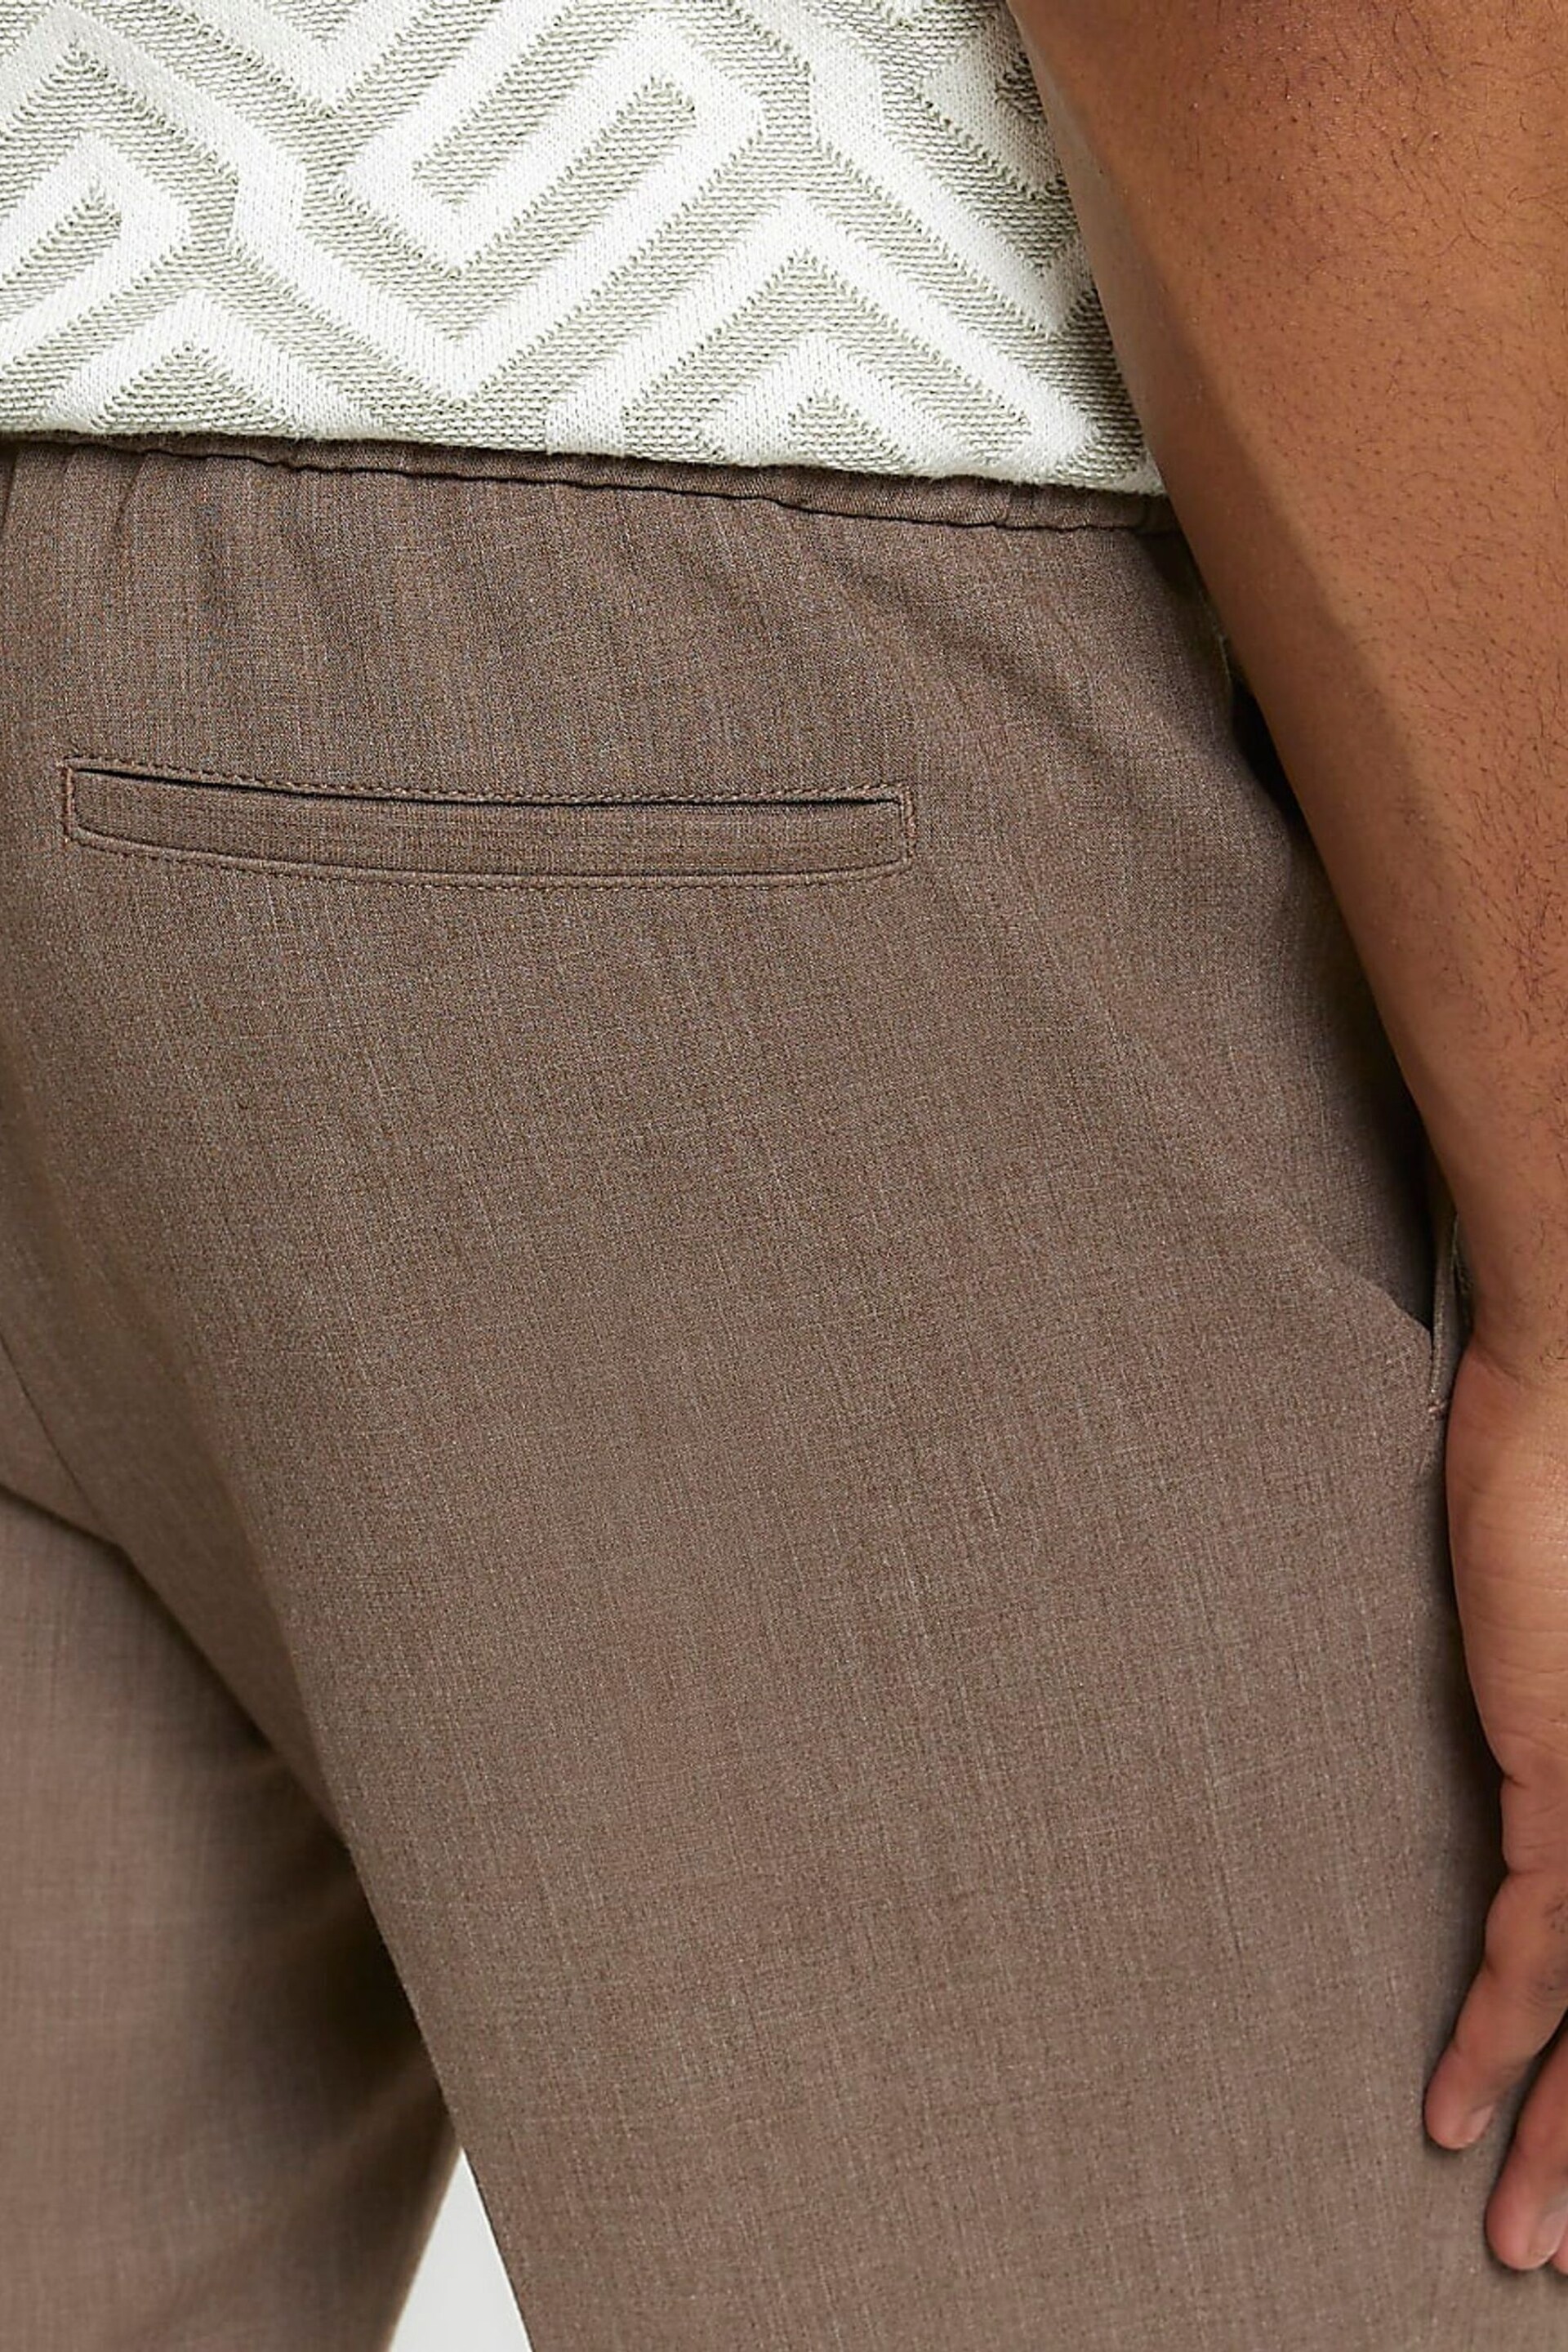 River Island Brown Elastic Ponte Trousers - Image 3 of 5